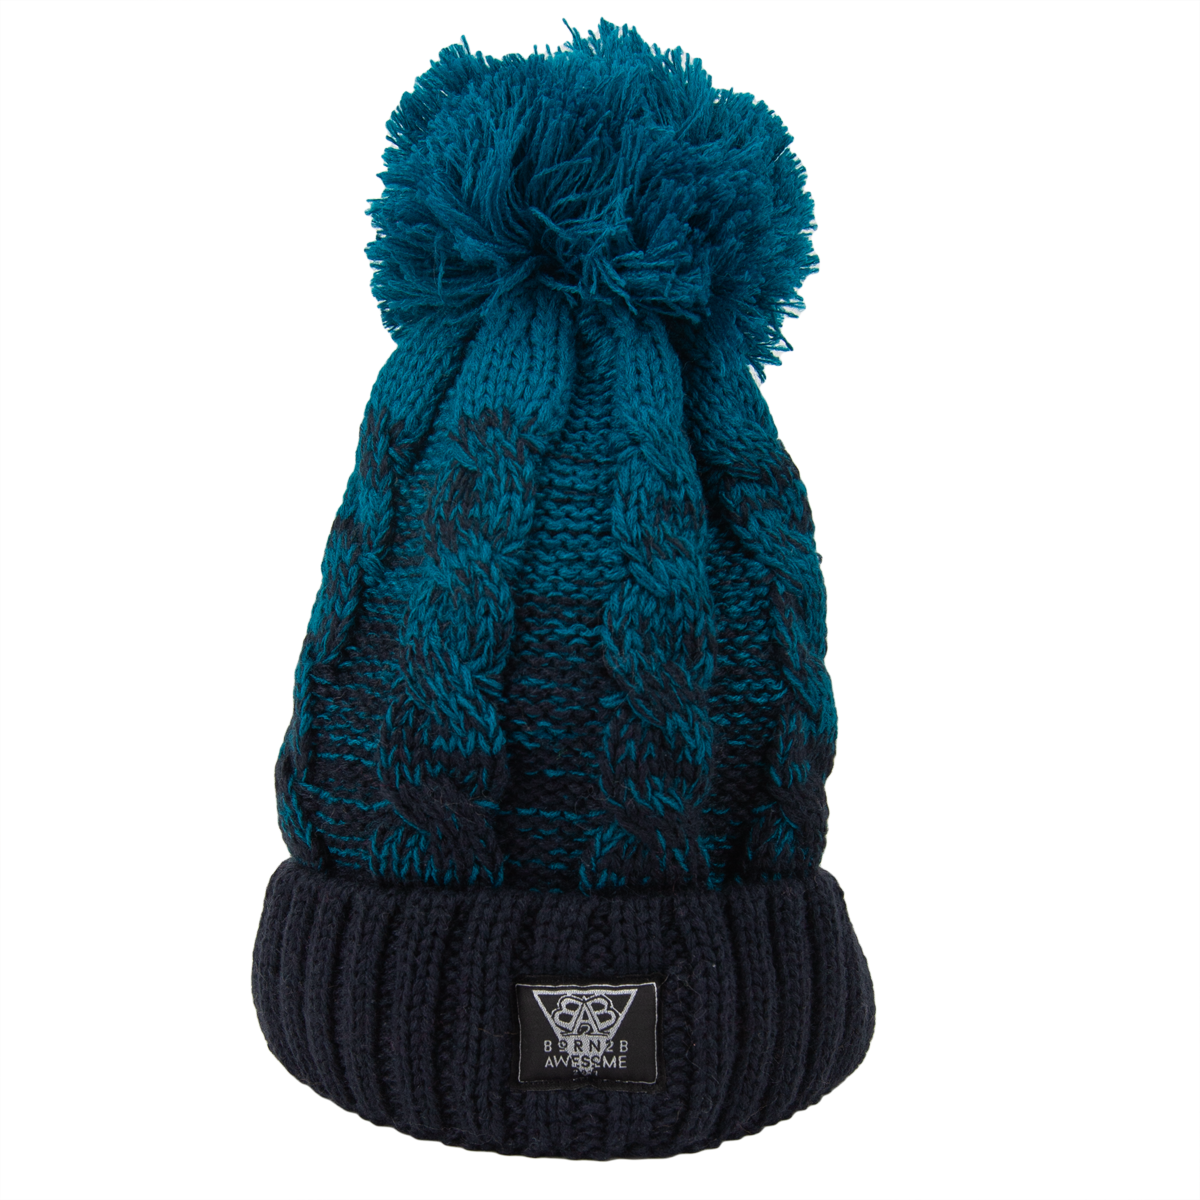 Ombre Bobble Beanie "Teal"